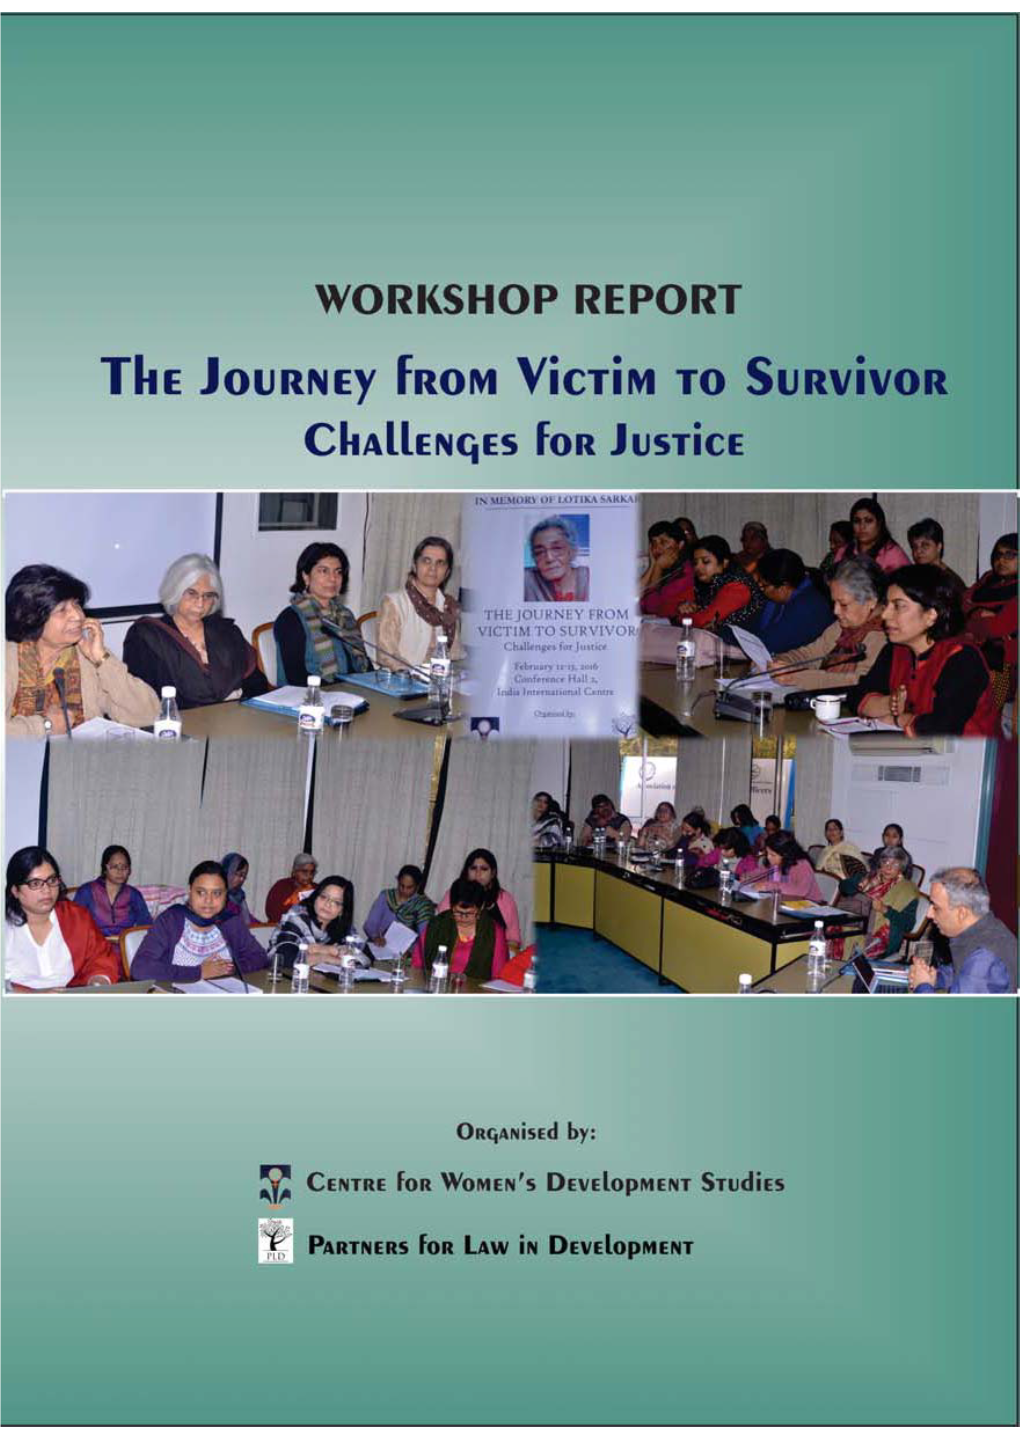 The Journey from Victim to Survivor: Challenges for Justice’